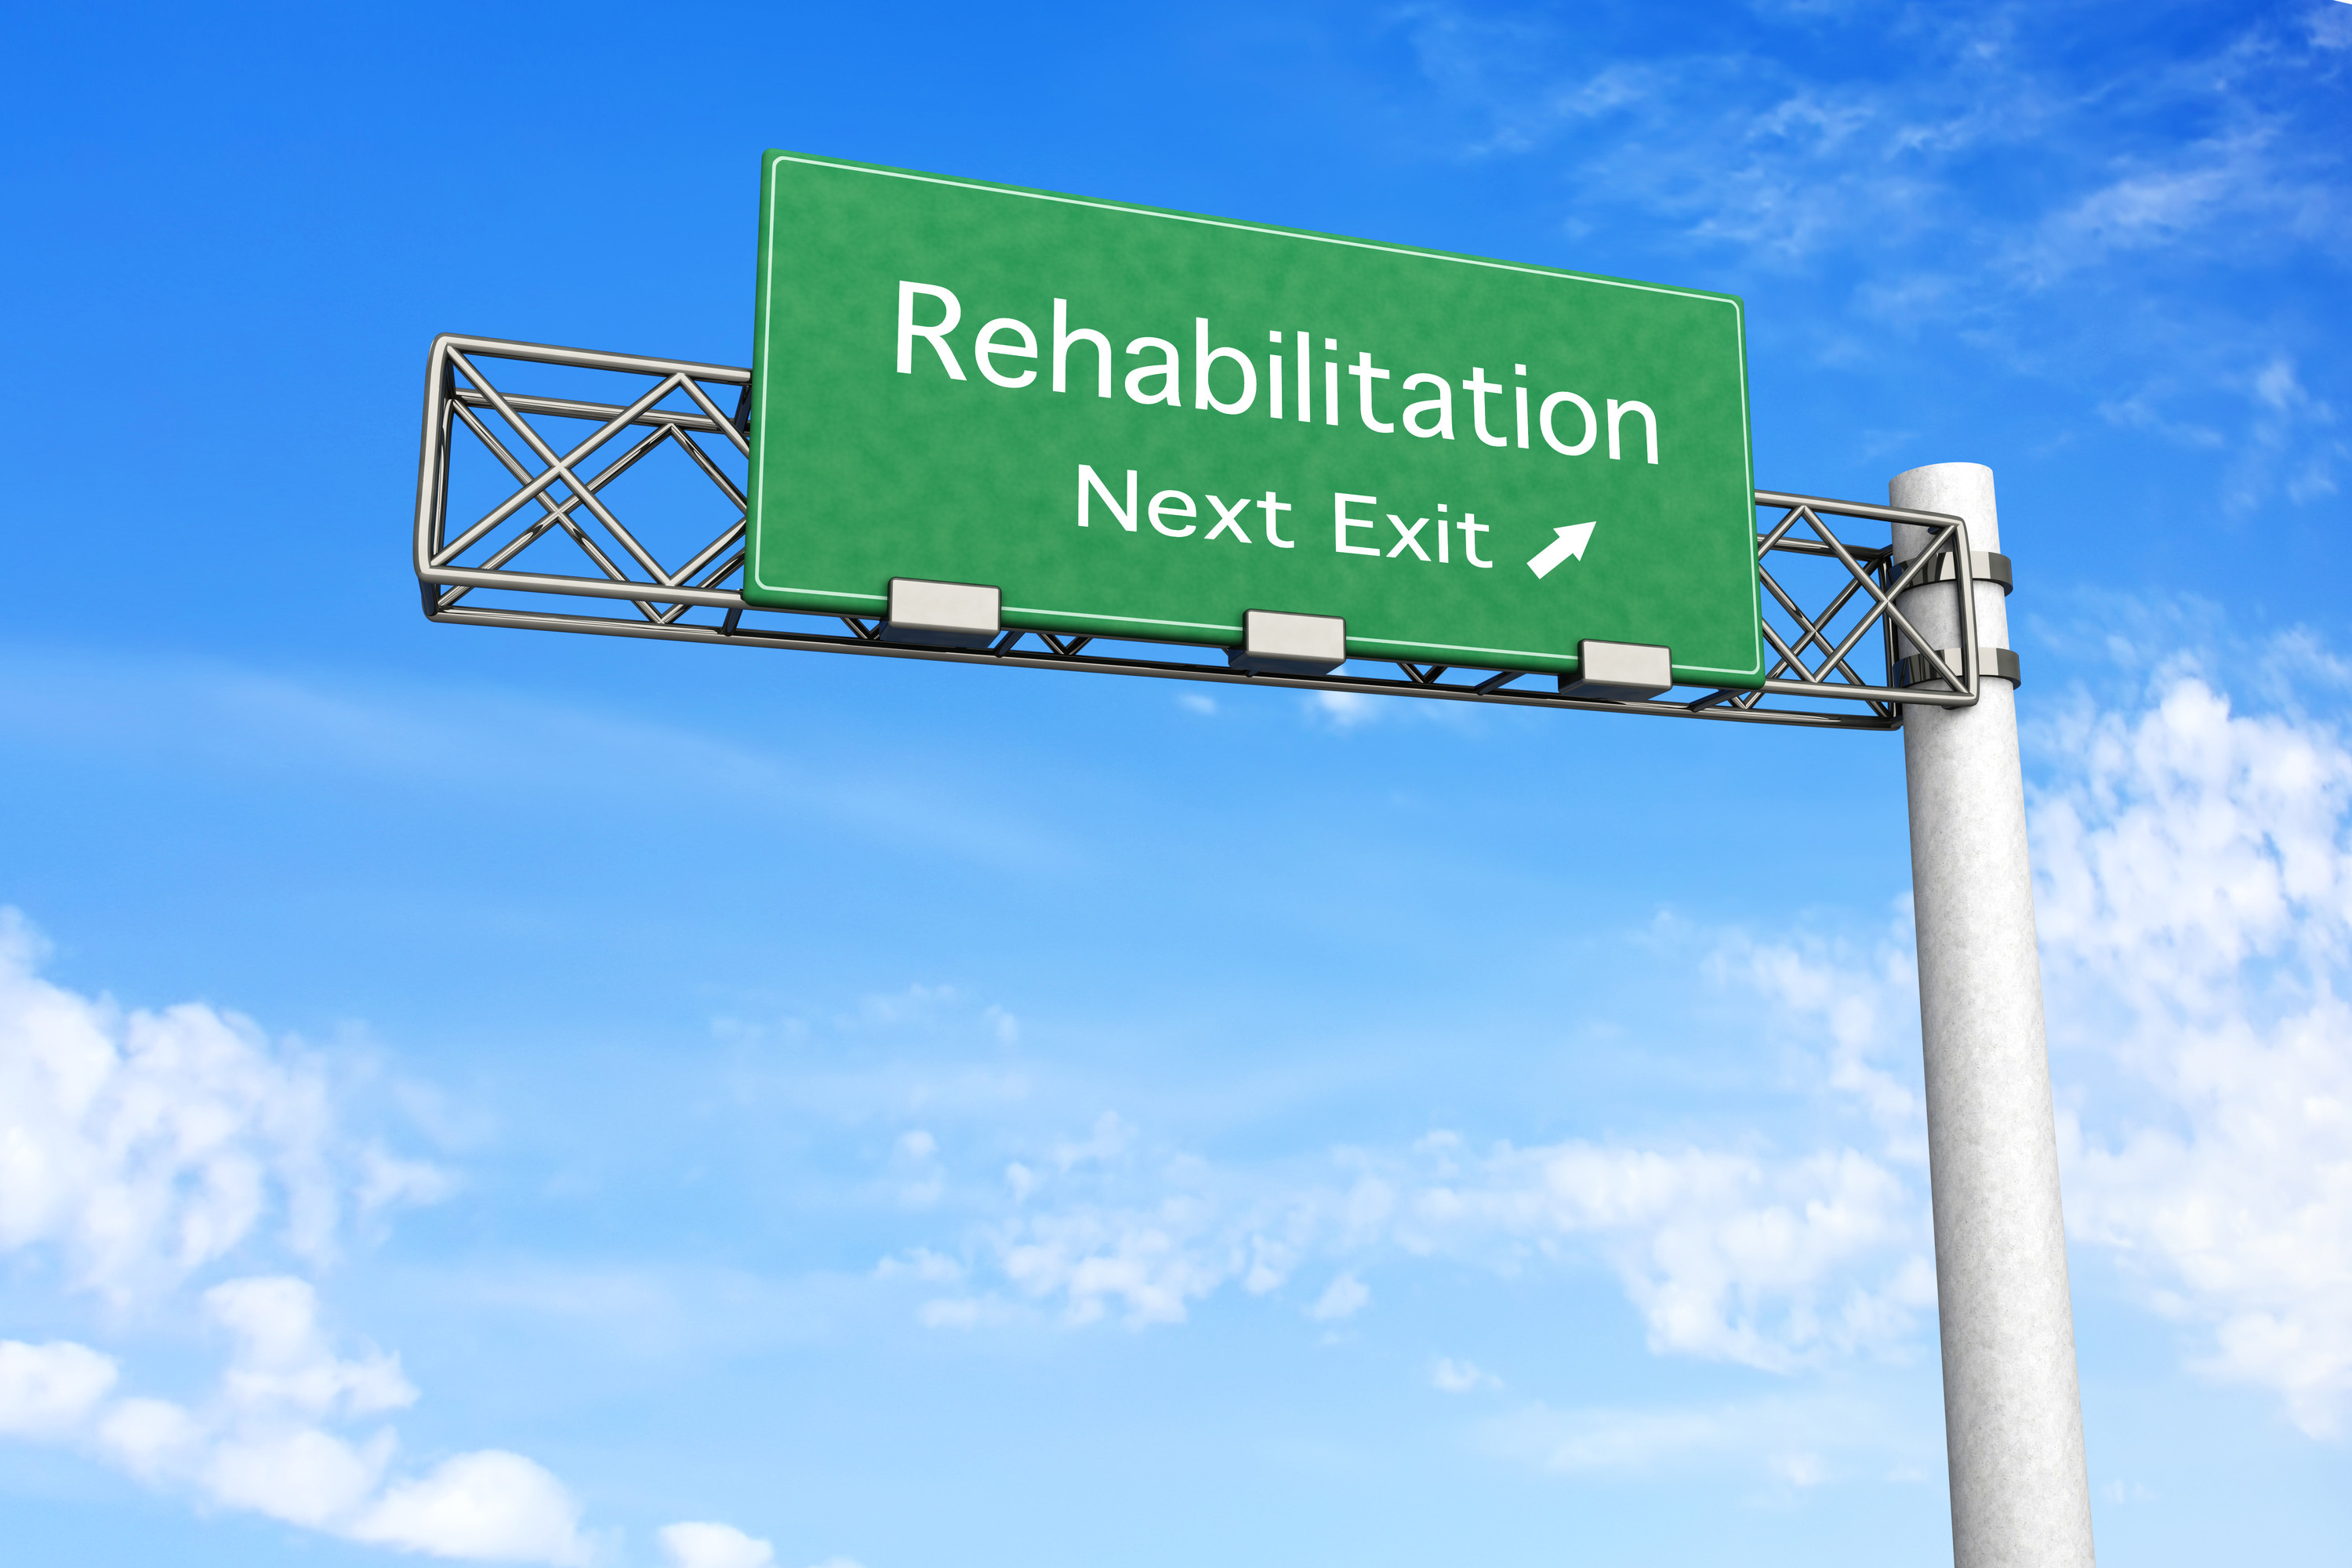 State Funded Drug Rehabs in Louisiana